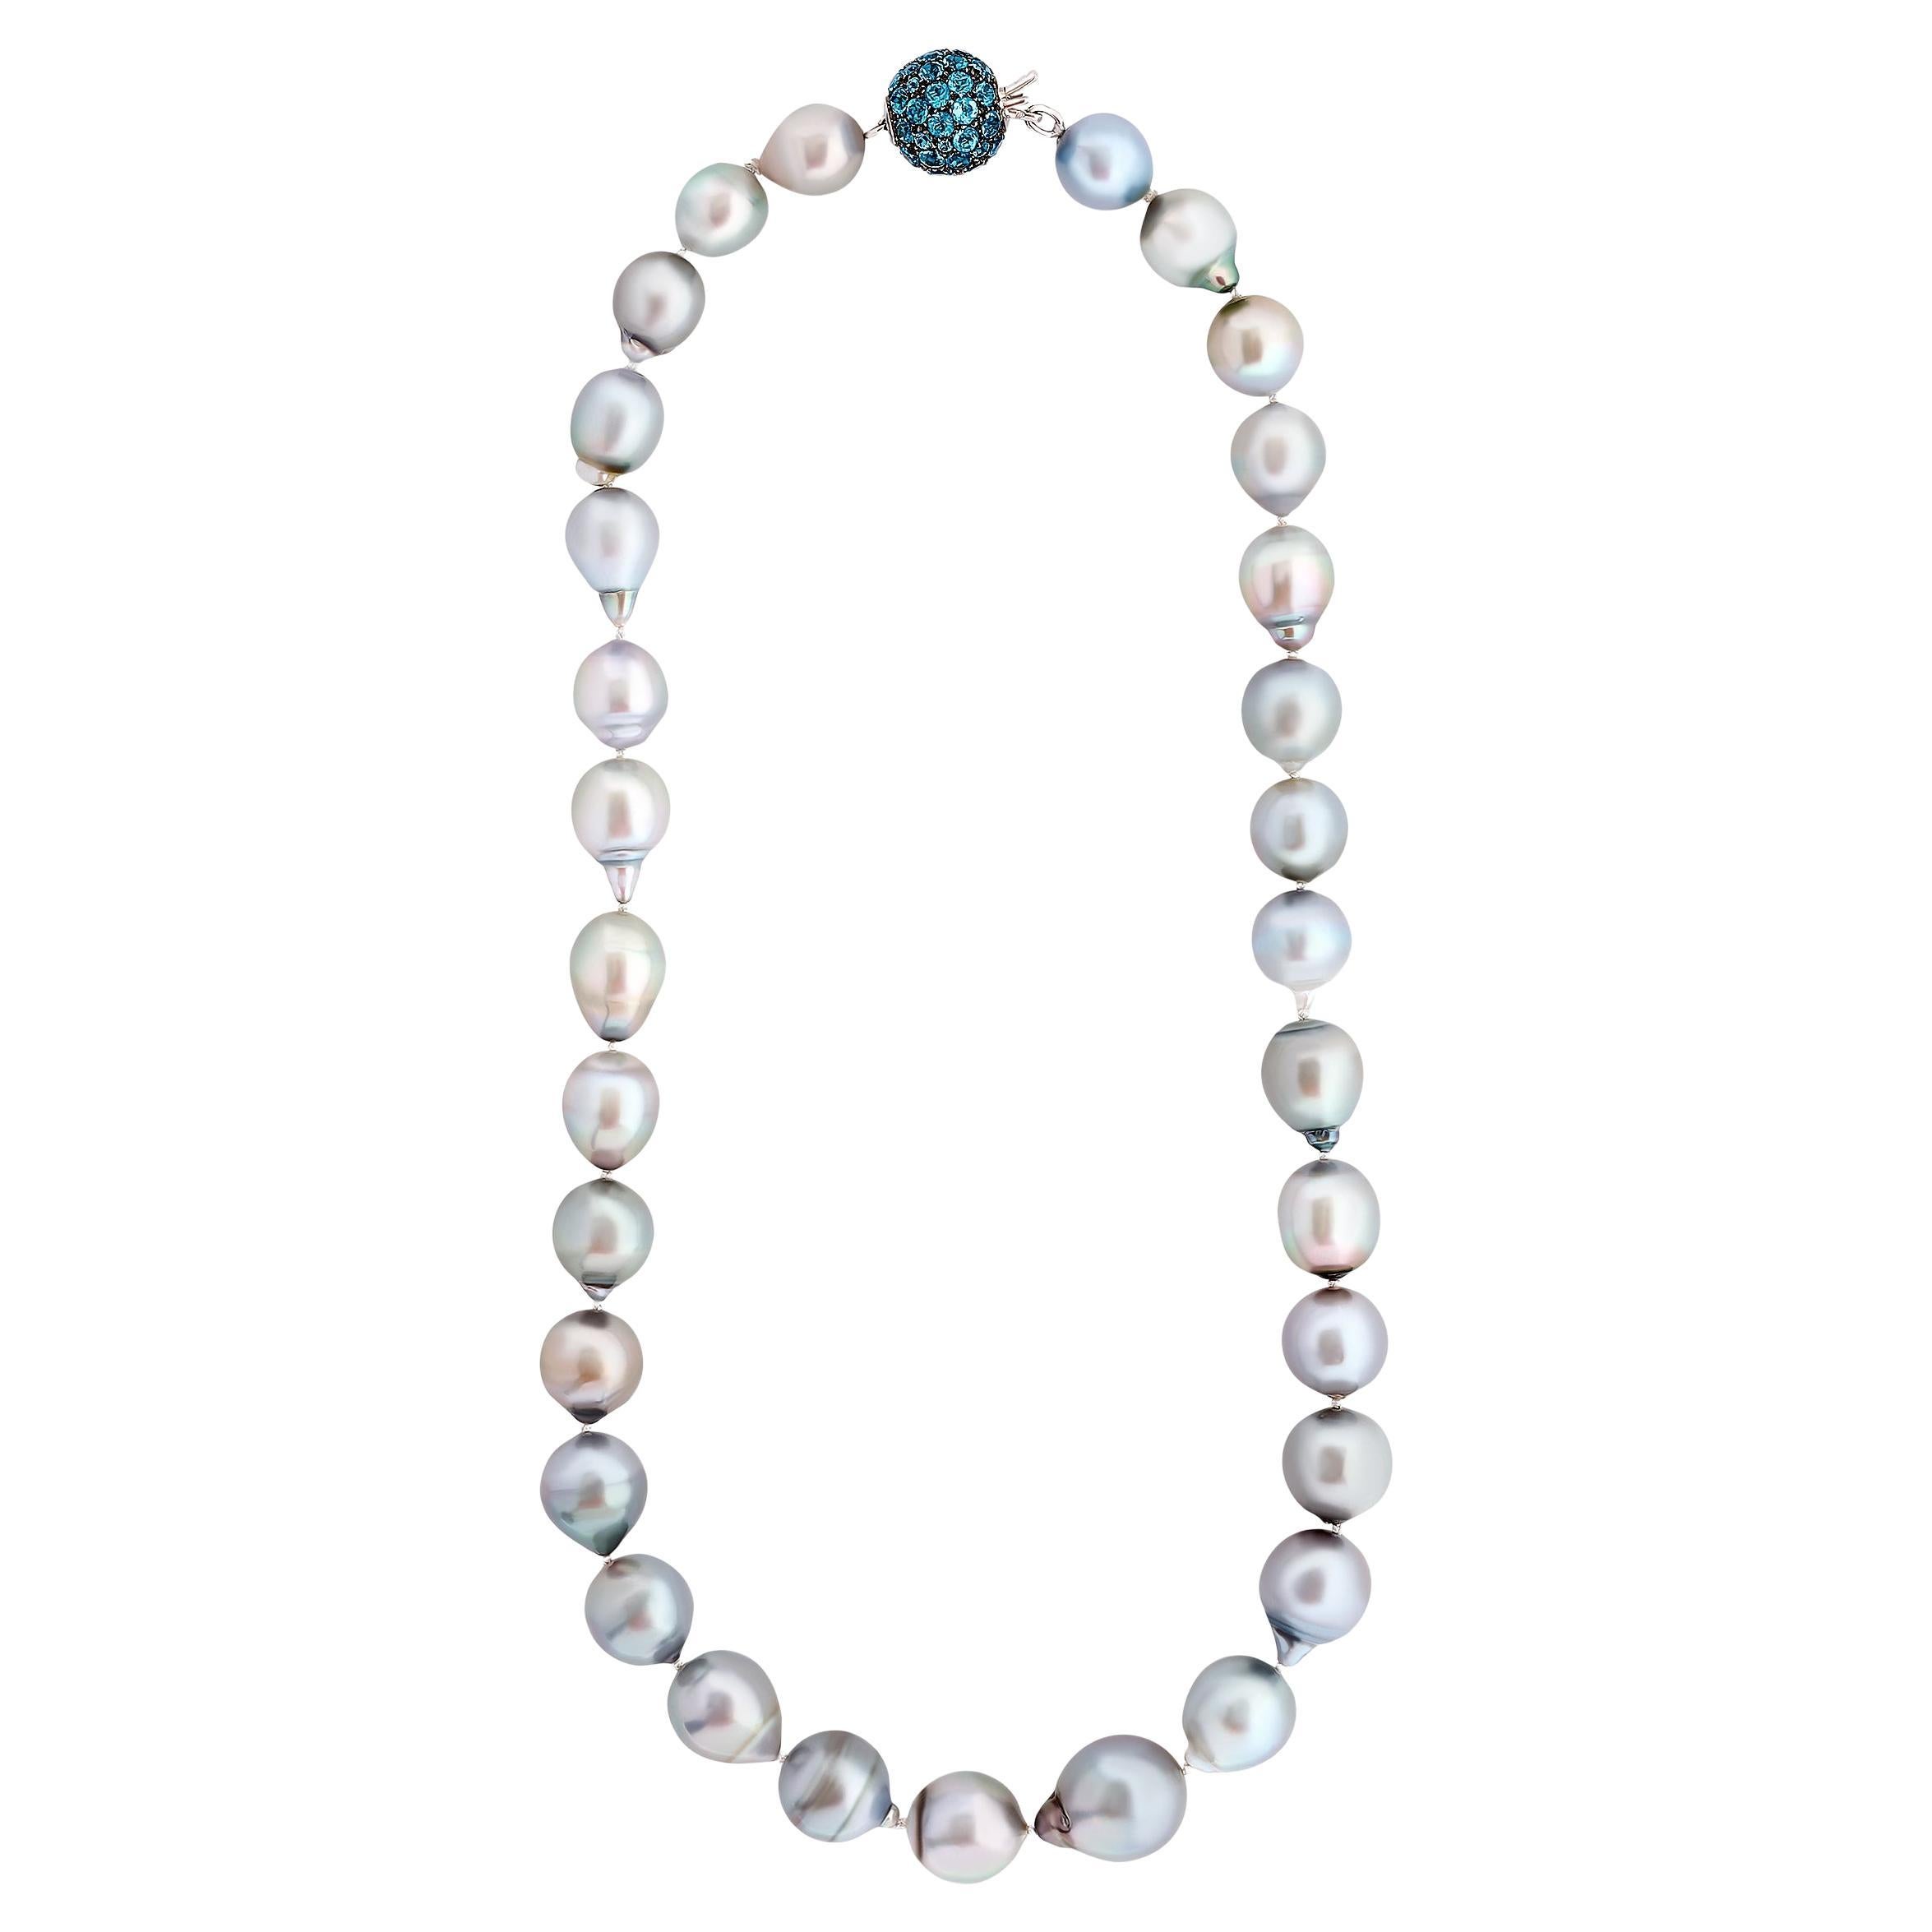 Laura Munder 18K White Gold Gray Pearl Necklace with Blue Topaz Ball Clasp